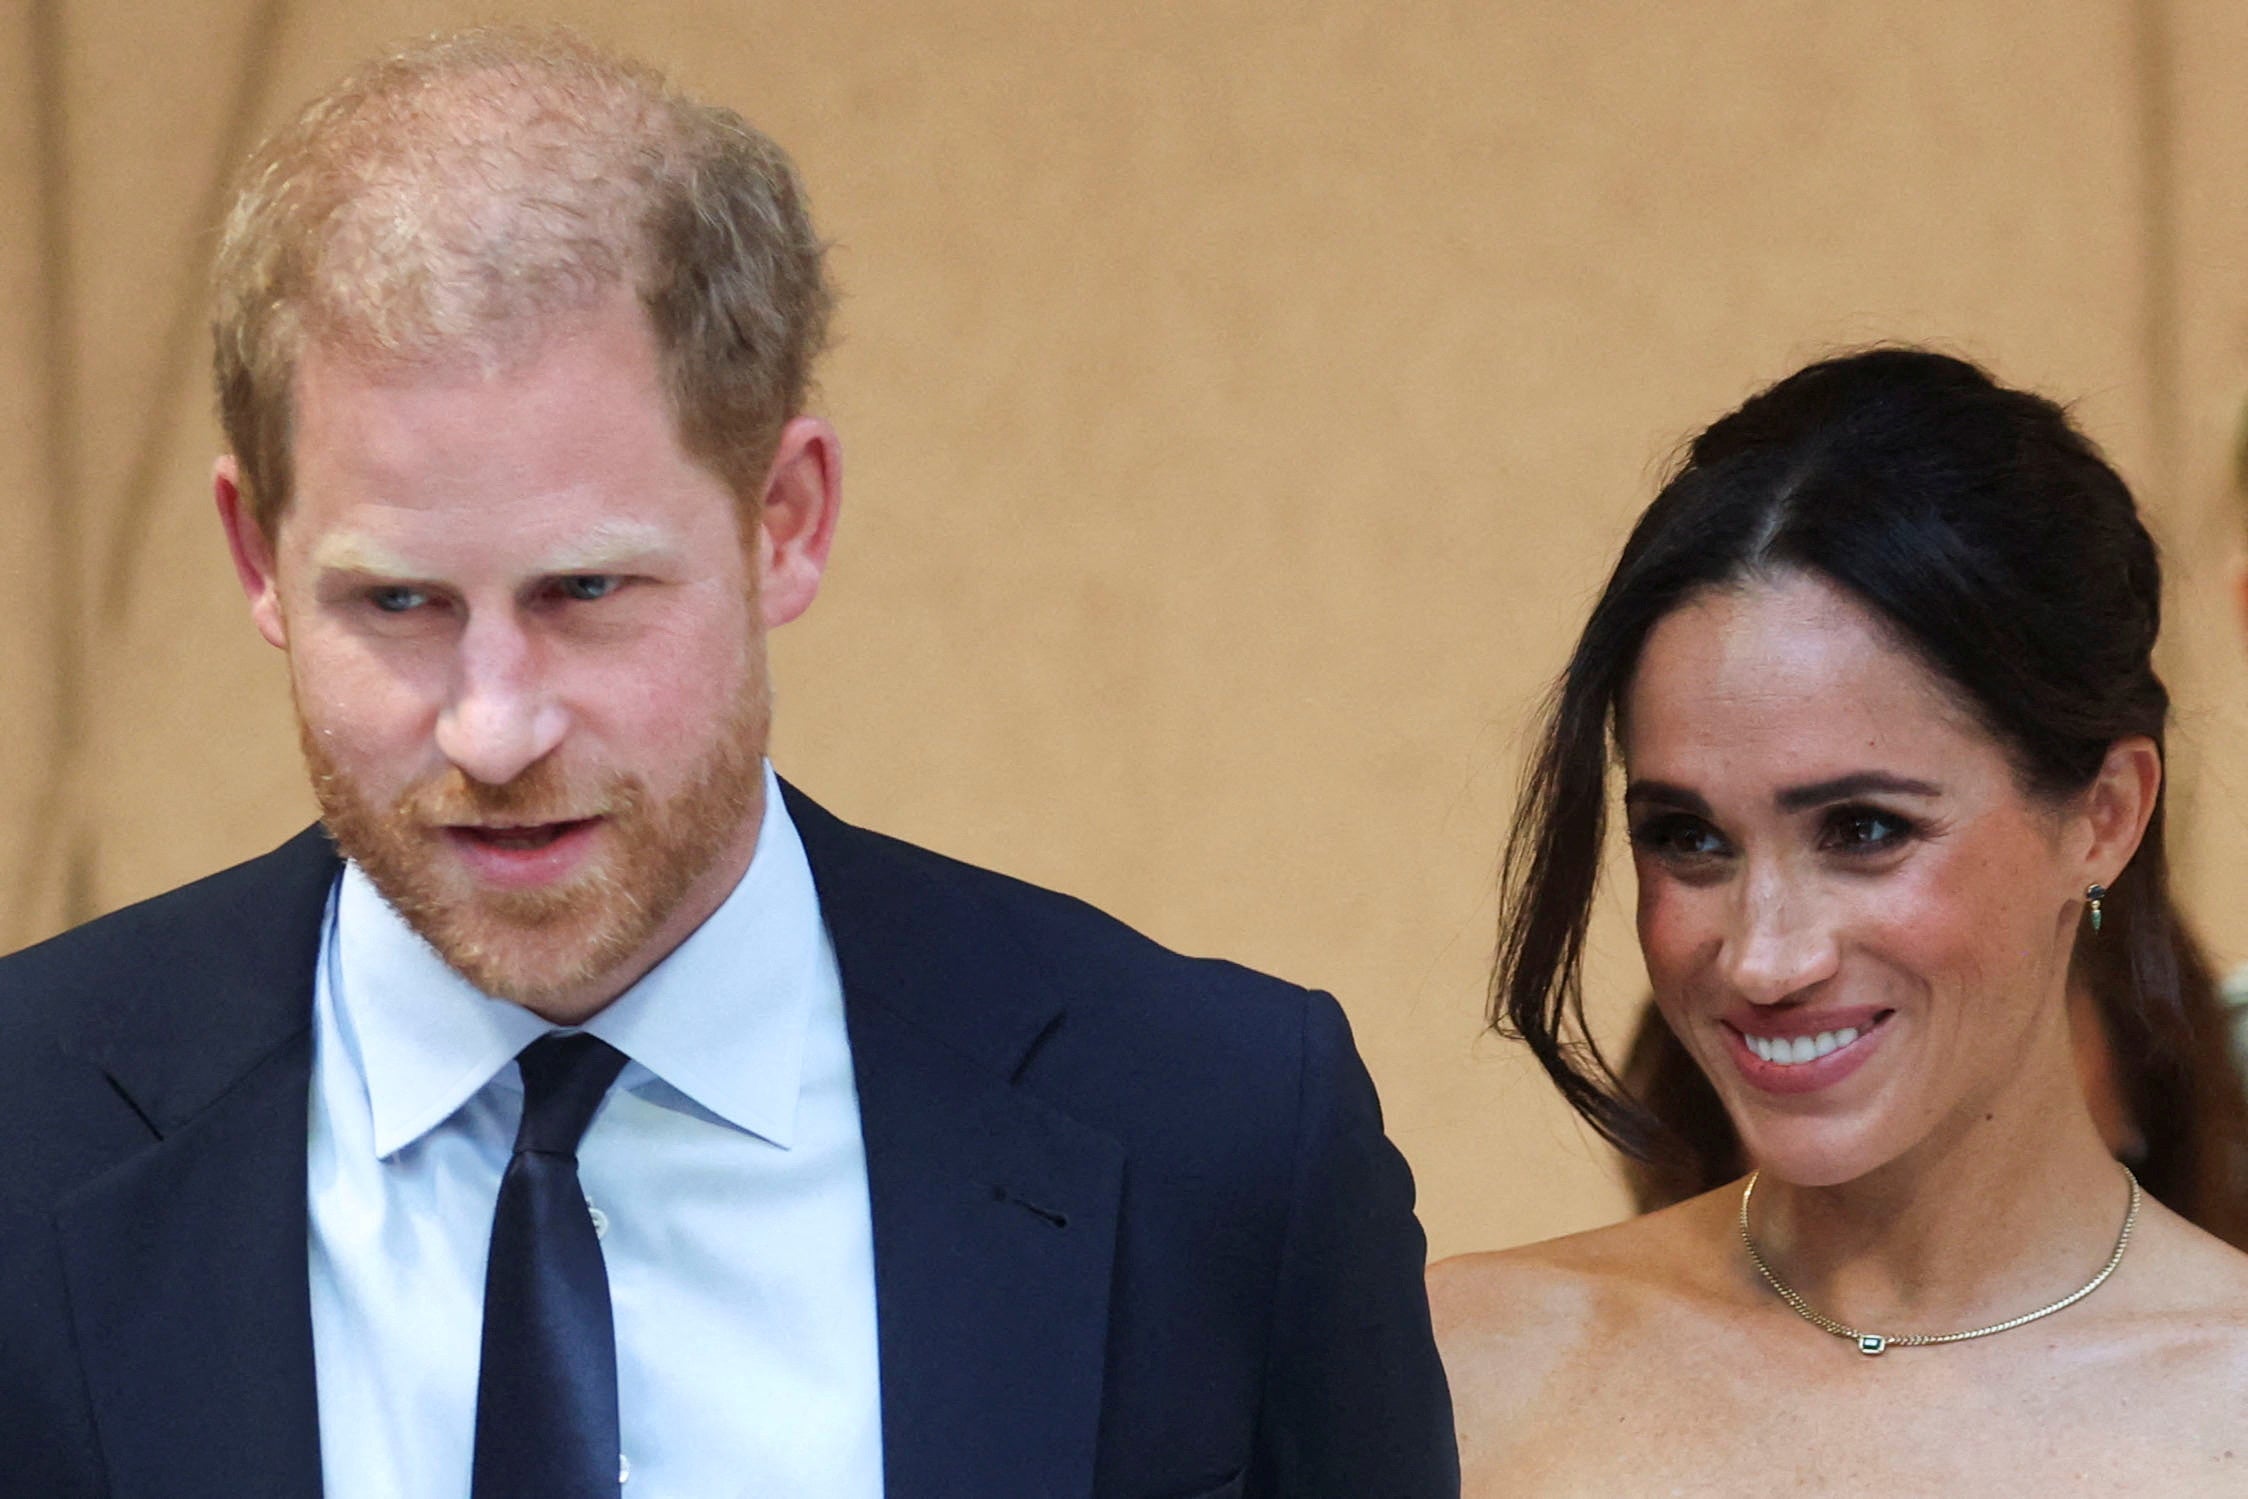 The duke has launched several legal battles since relocating to California with his wife Meghan Markle